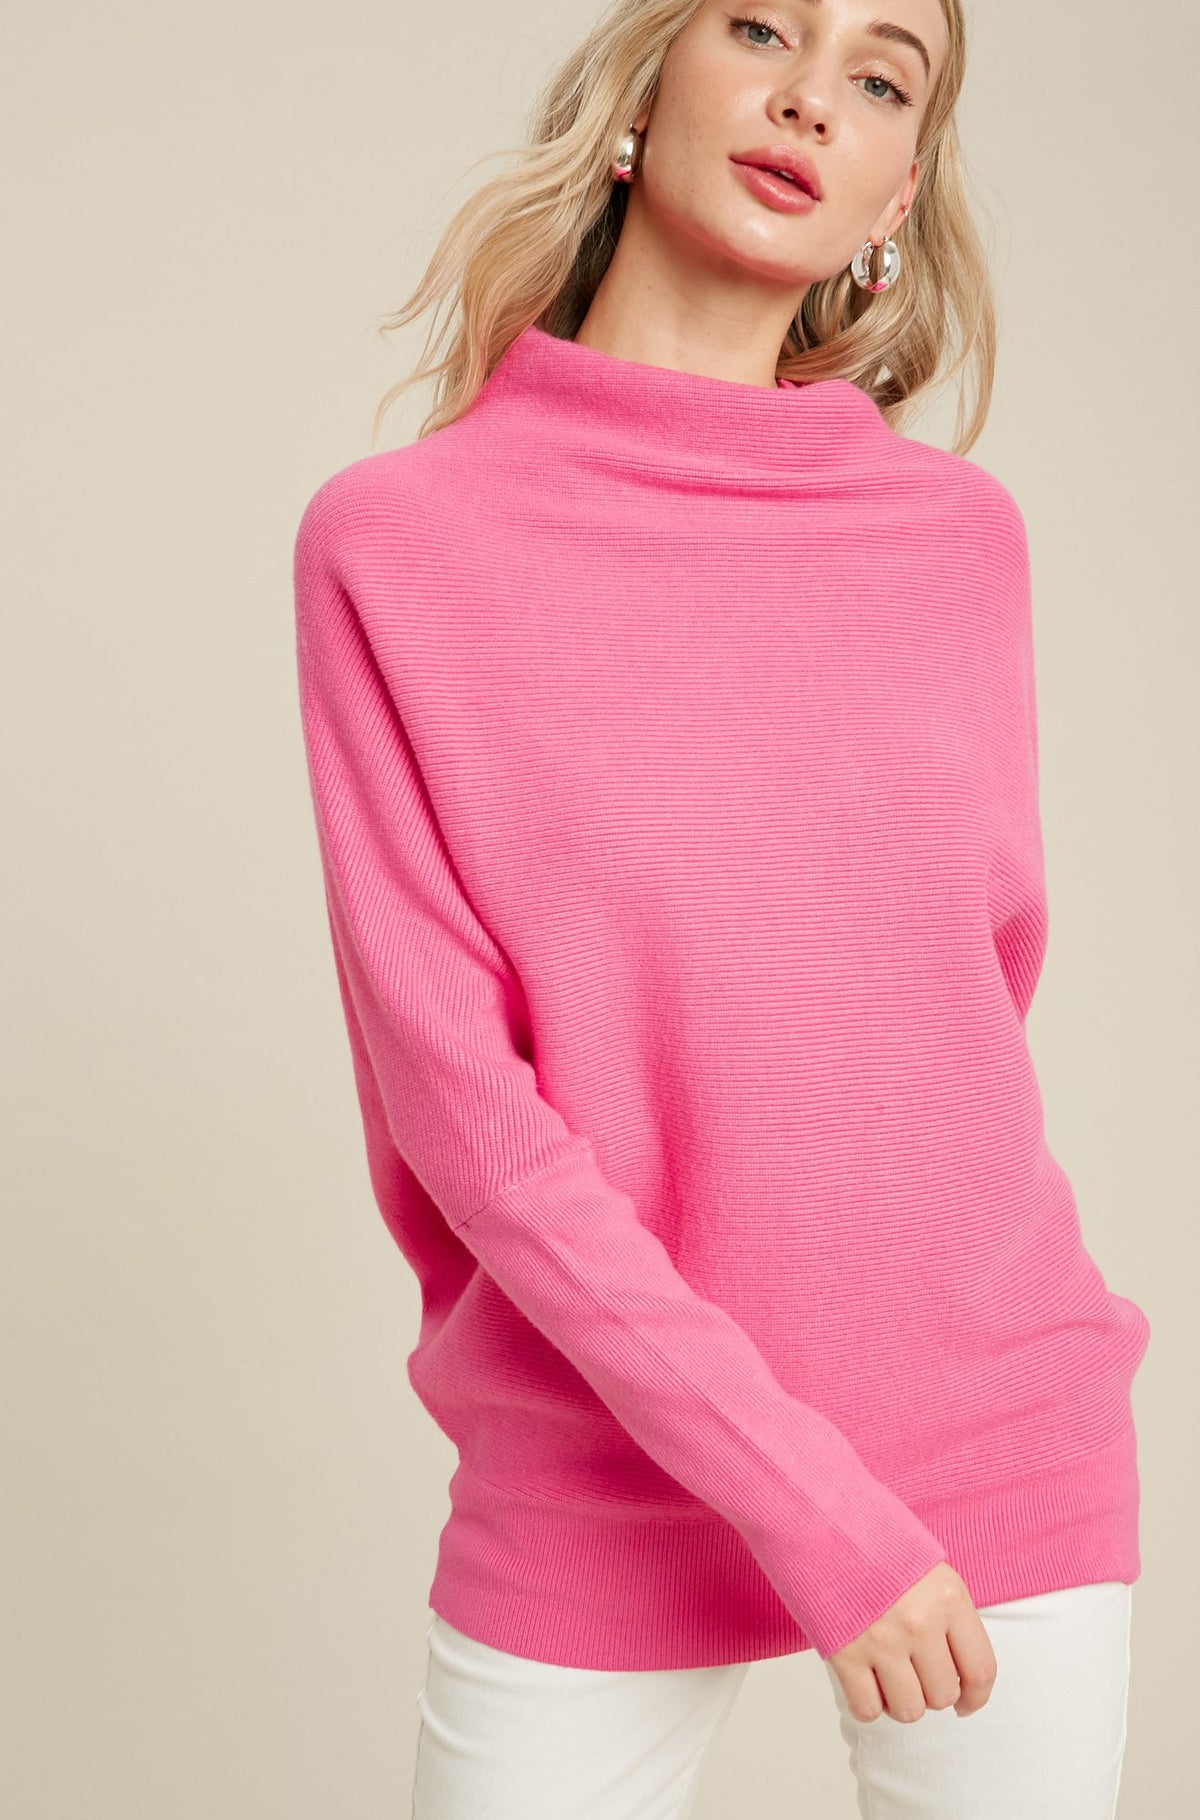 The Slouchy Sweater In Hot Pink